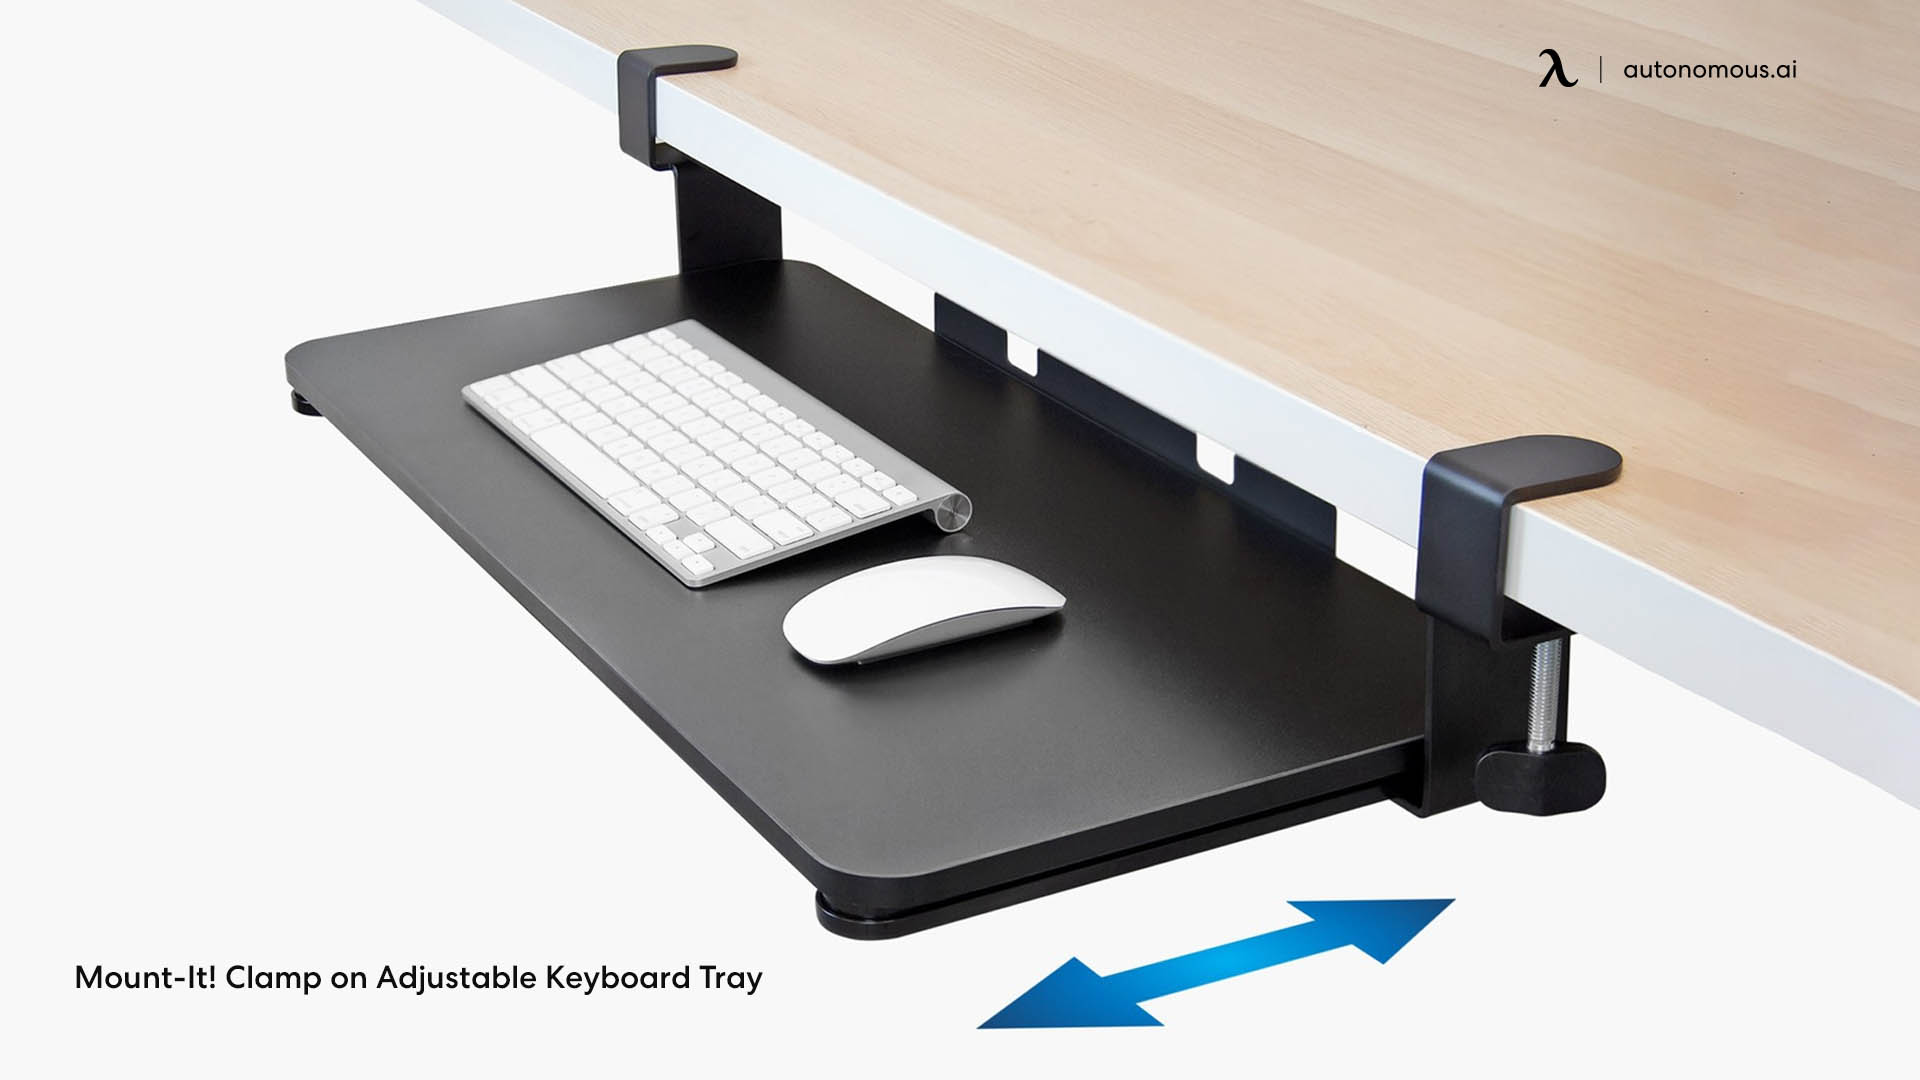 Mount-It! Clamp on adjustable keyboard mouse tray